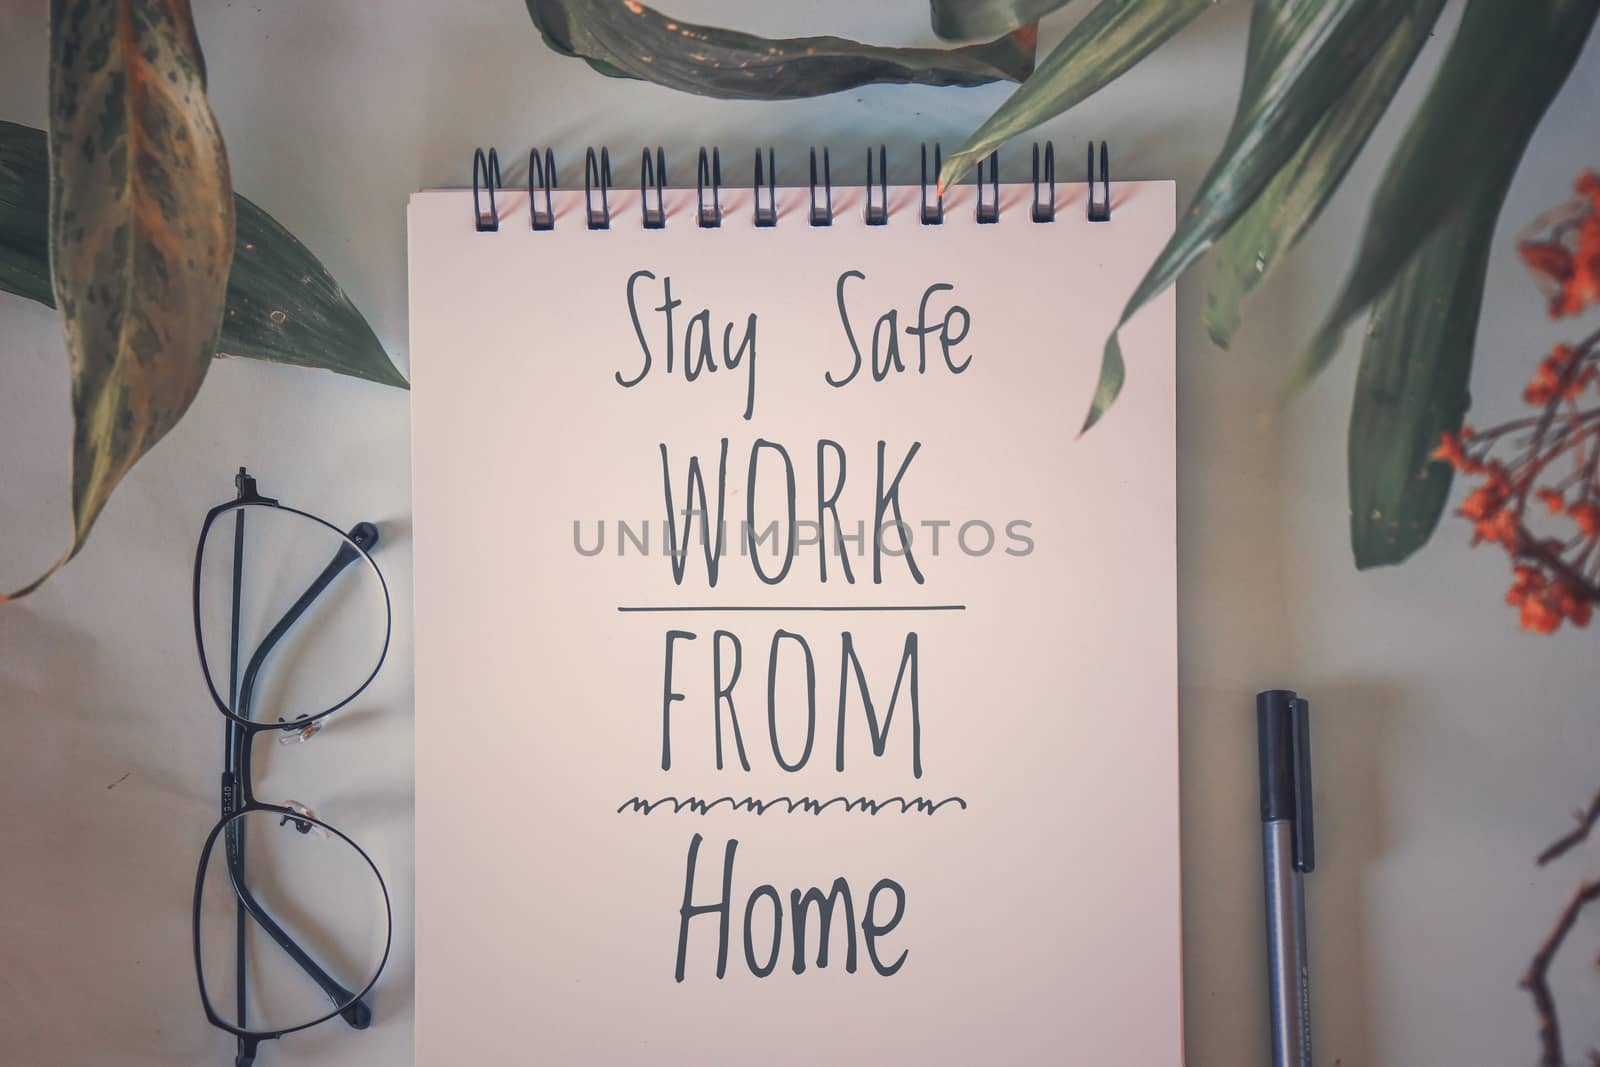 Photo and text overlay promoting work from home as a way to cope with the covid-19 pandemic, staying safe and living the new normal lifestyle